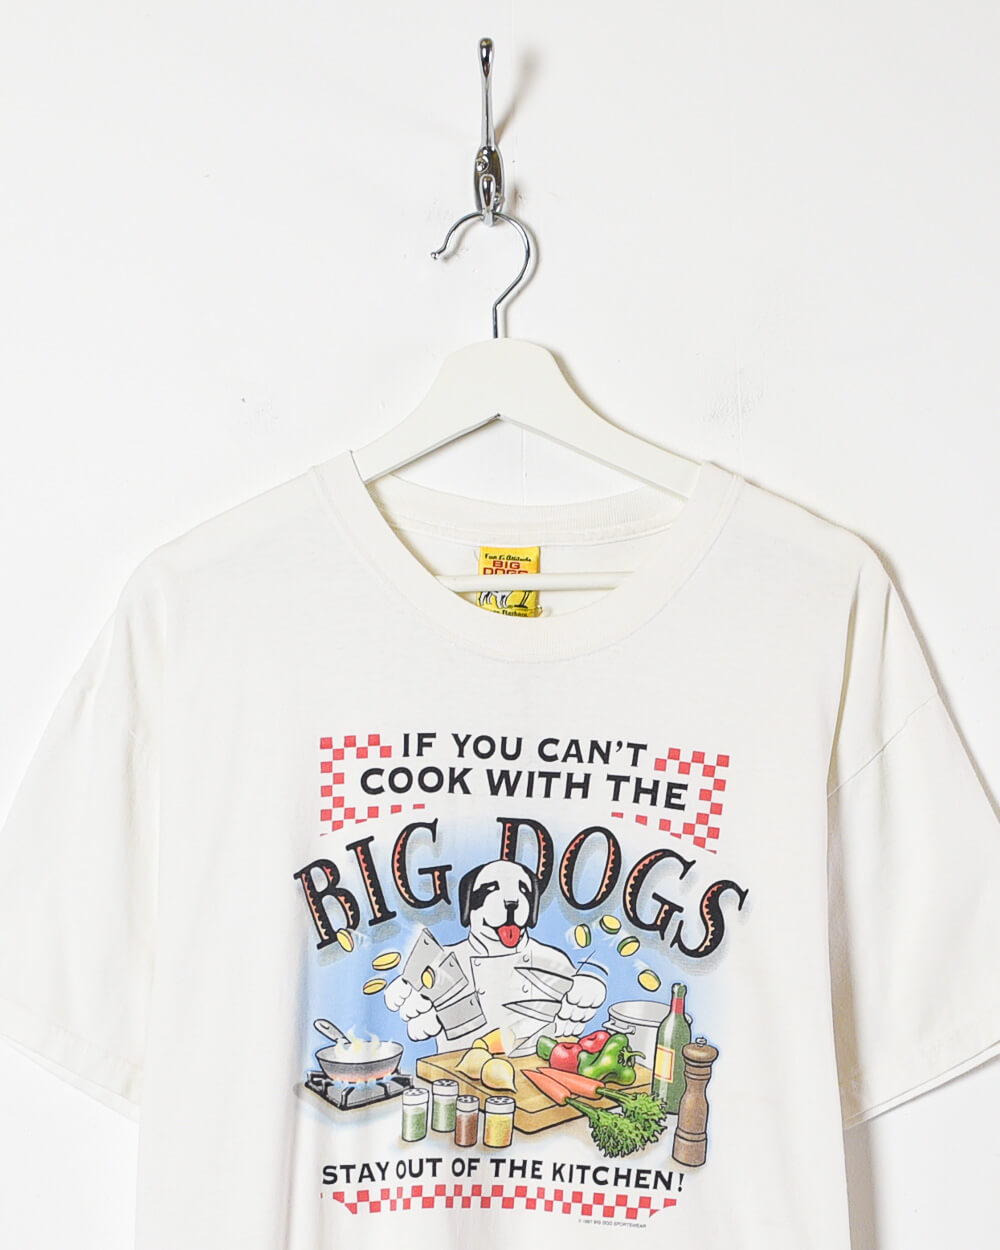 If You Can Not Drink T-Shirt – Big Dogs